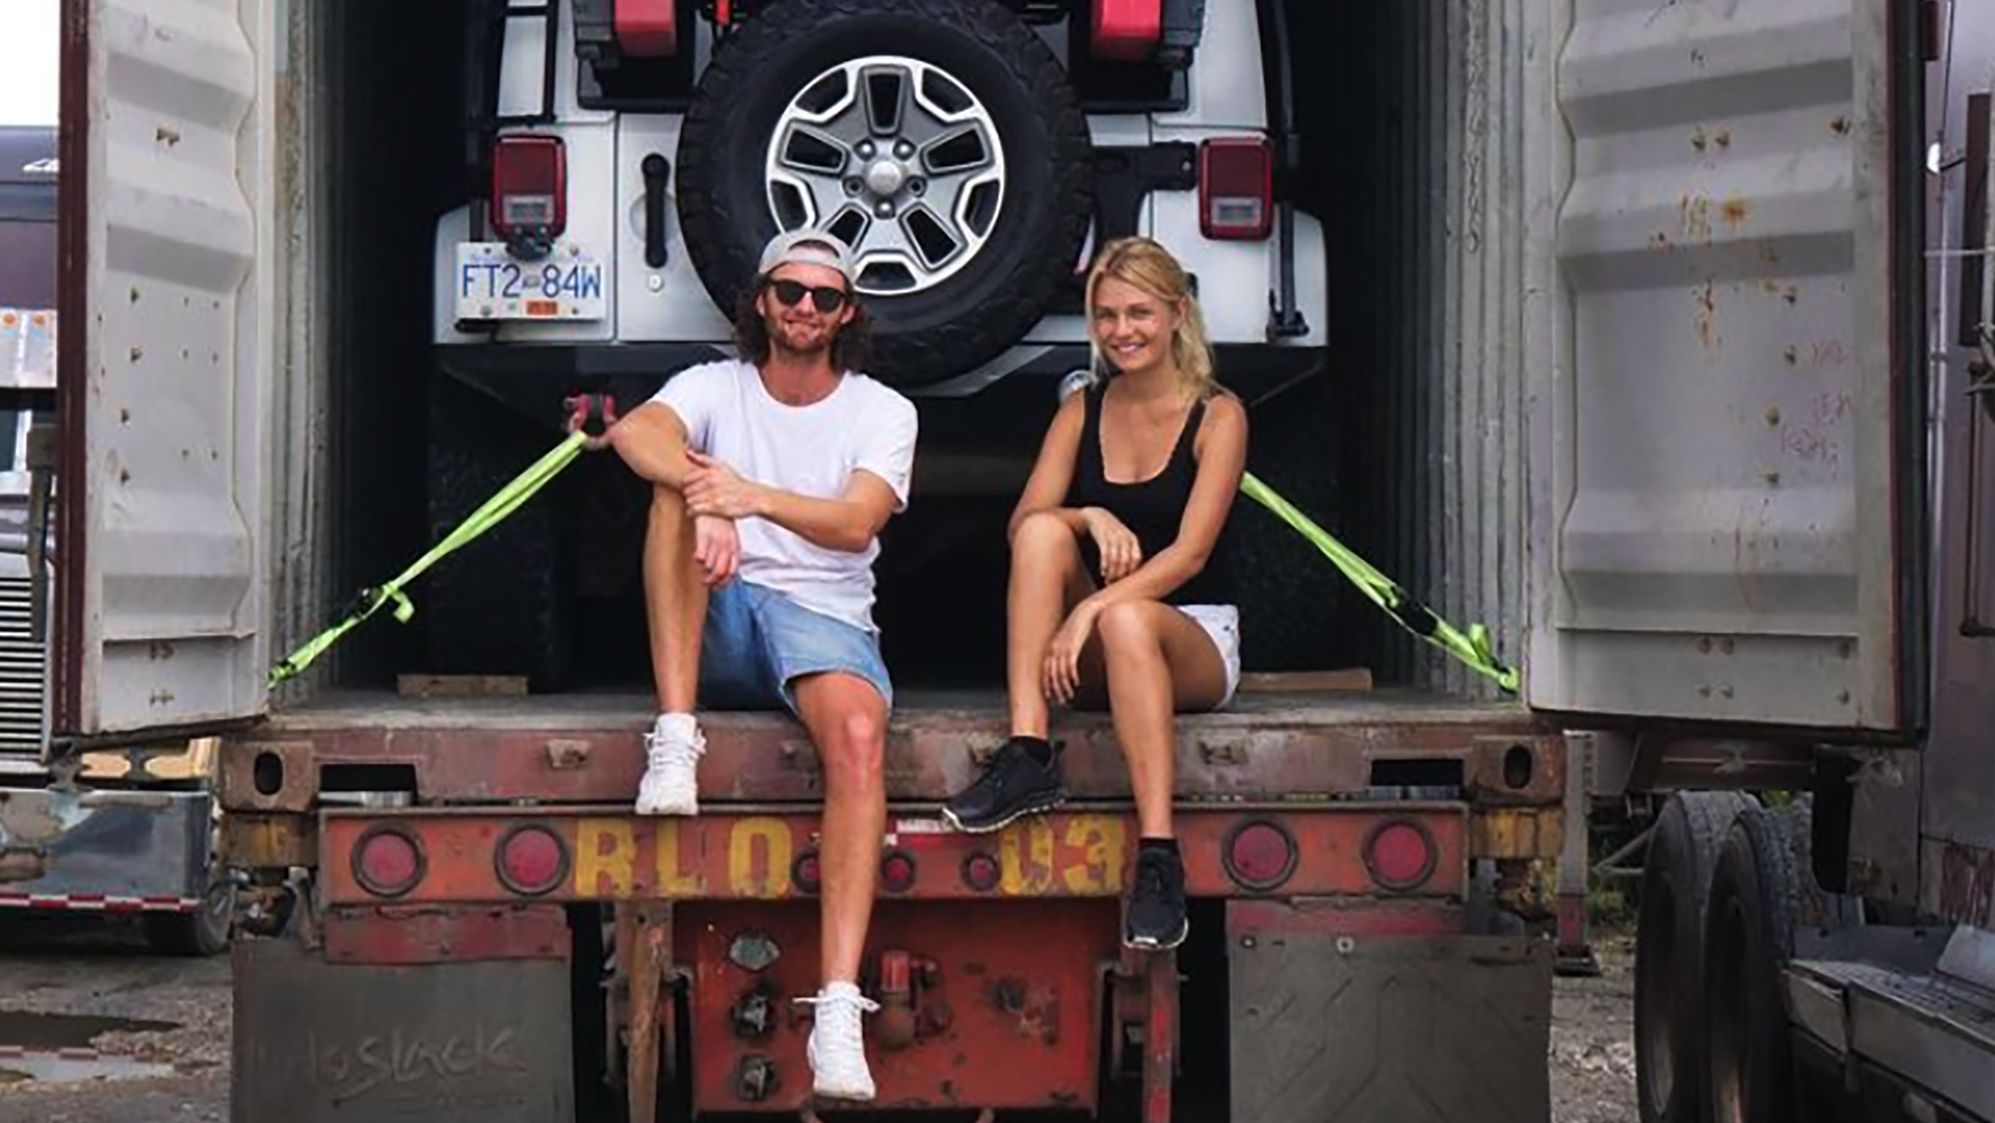 New Zealand social media influencers Topher Richwhite and Bridget Thackwray, have been allowed to leave Iran. Photo: Expeditionearth.live/Instagram